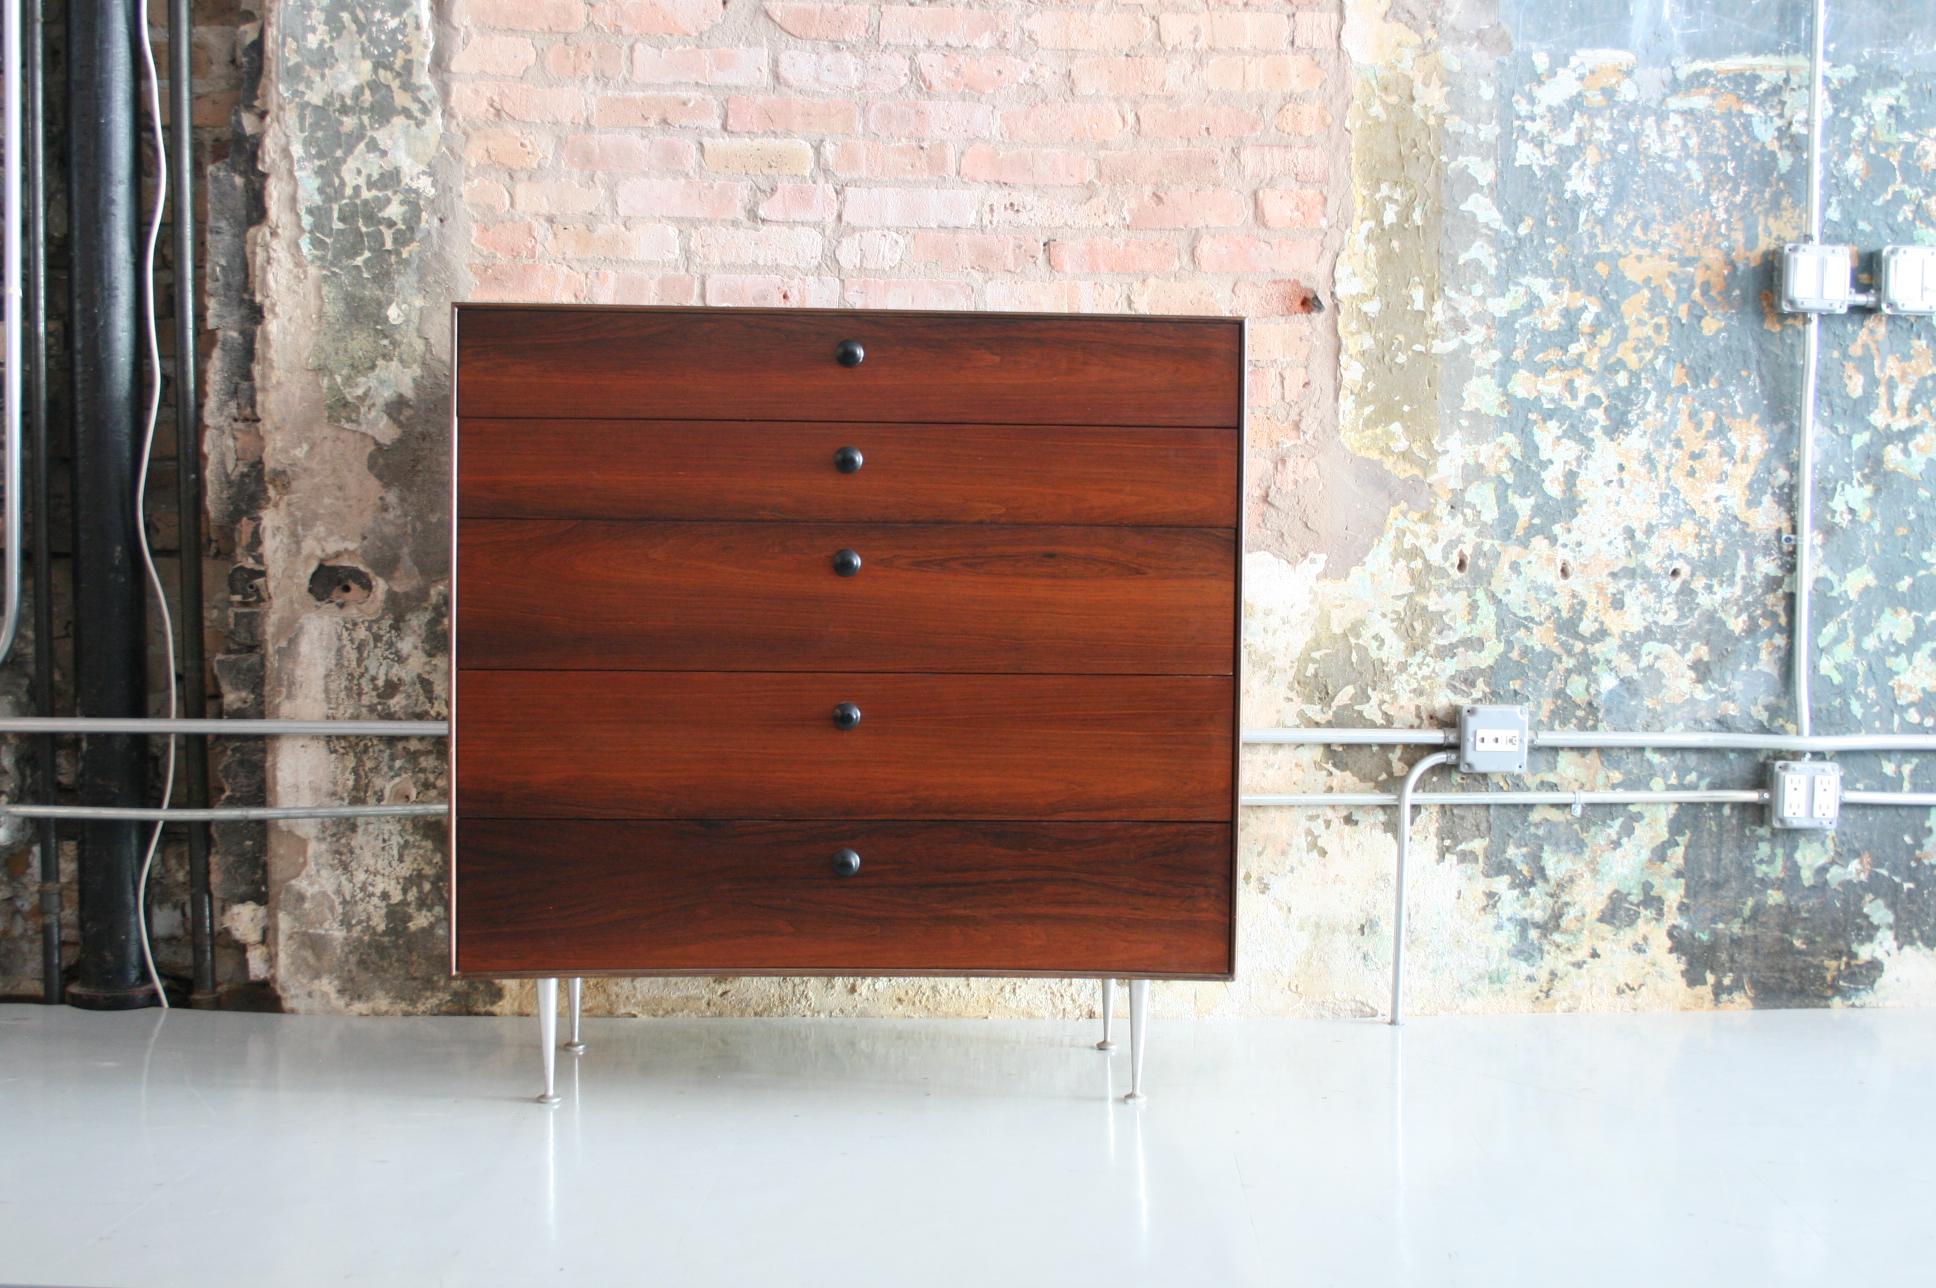 Original rosewood 'Thin Edge' series dresser by George Nelson for Herman Miller. Fully restored to perfection! Original pulls!